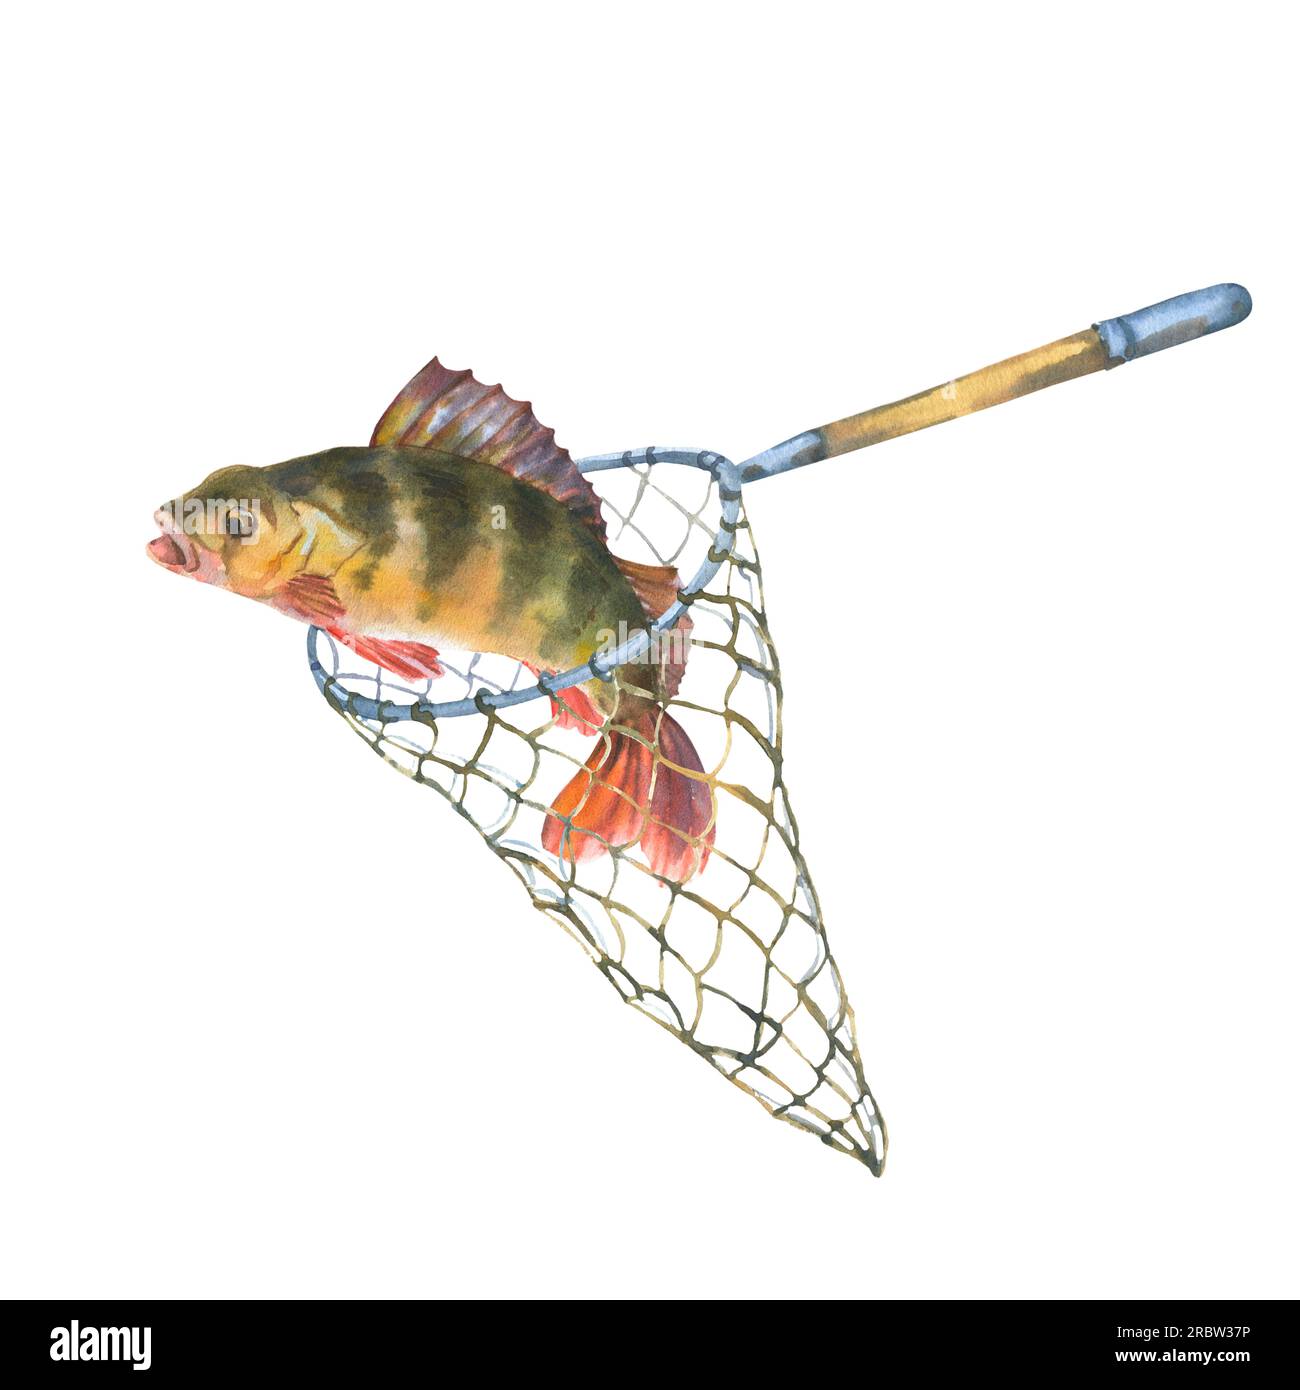 Decorative Artwork of Fish with Fishing Net Editorial Stock Image